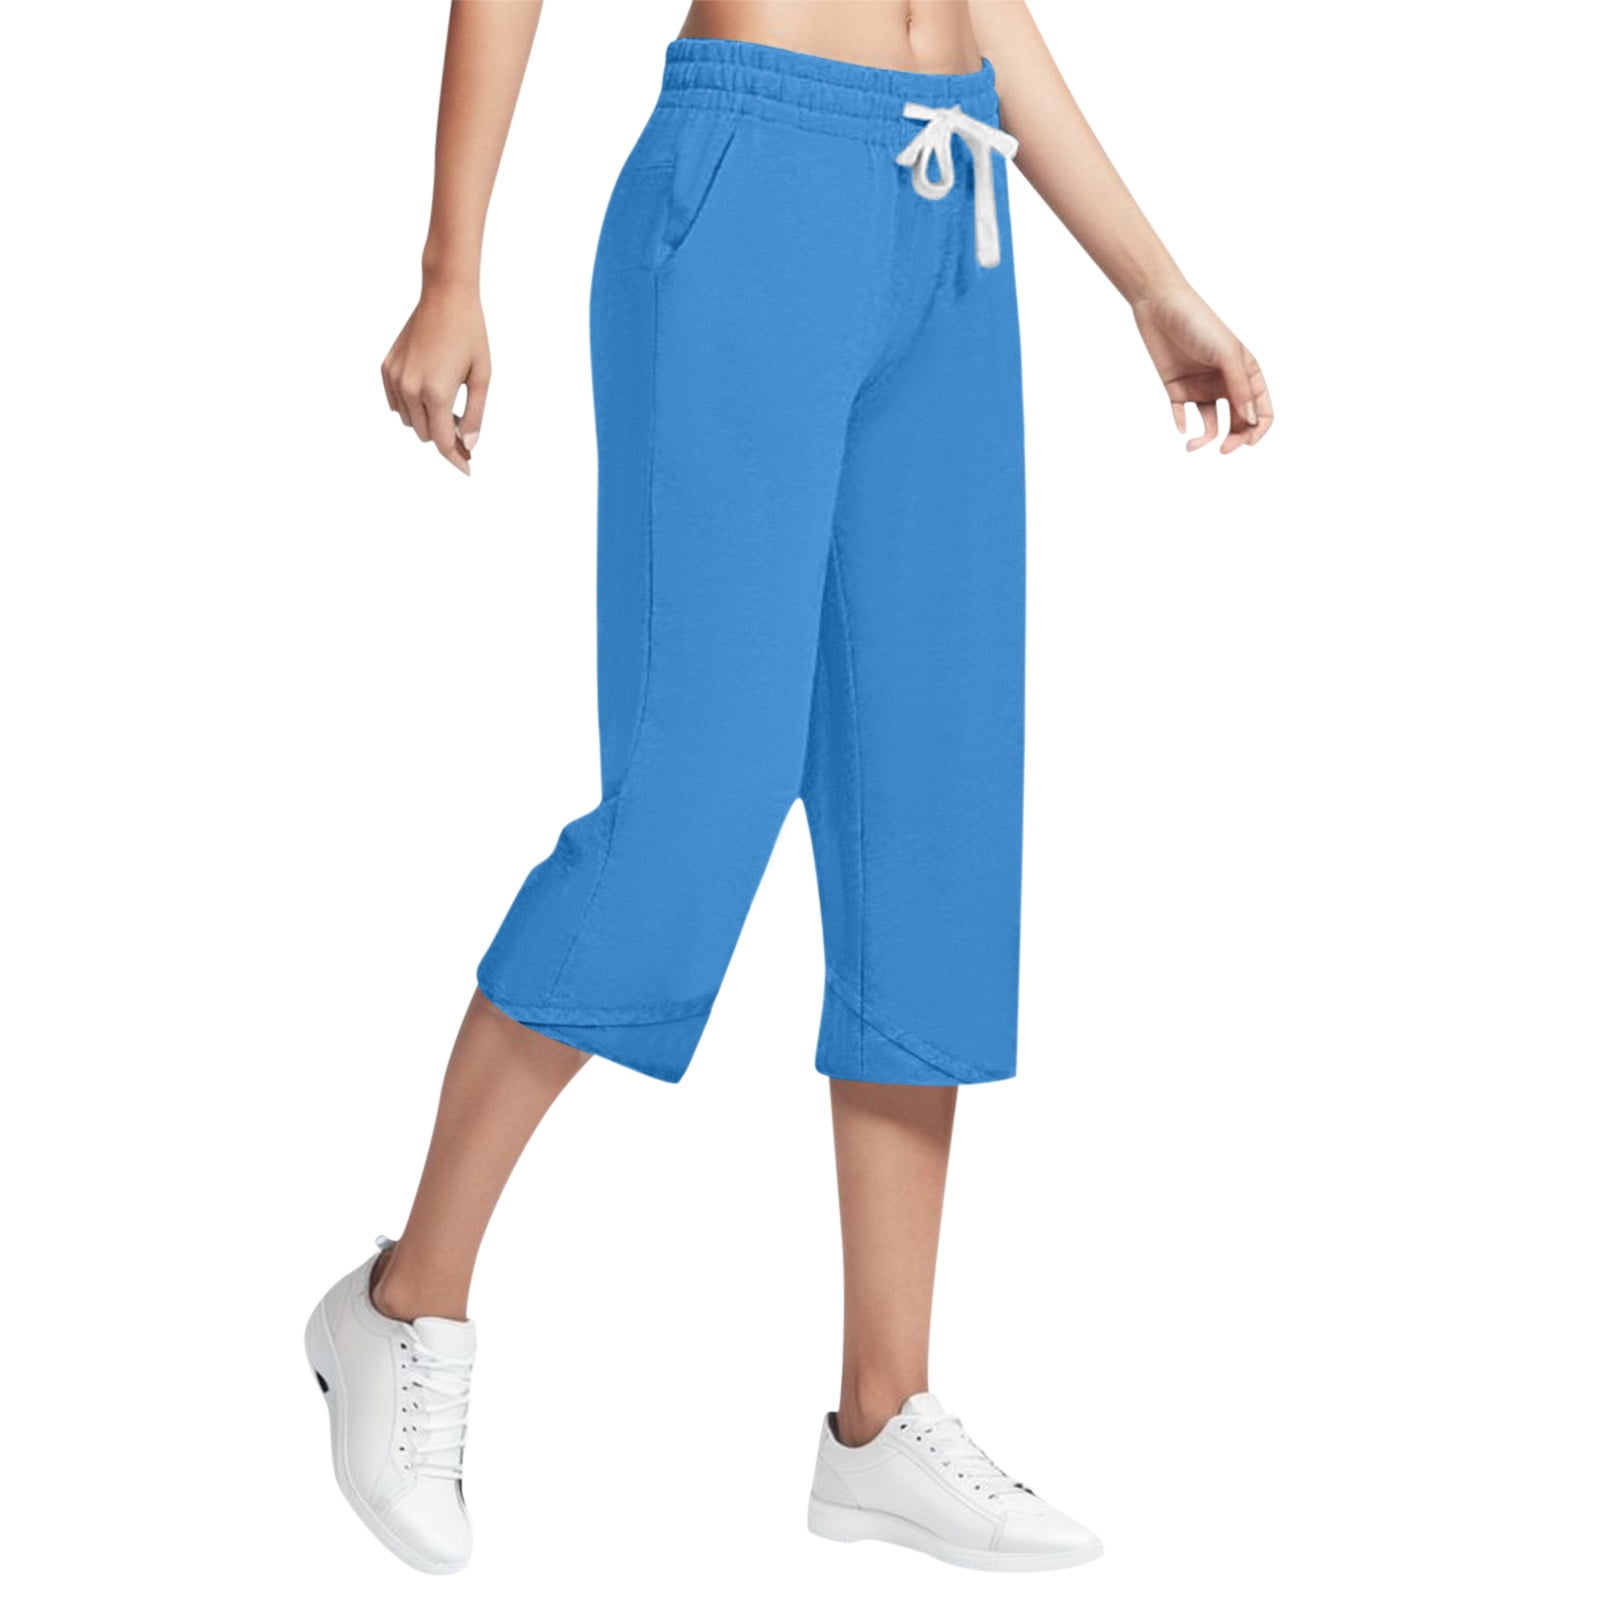 PMUYBHF Yoga Pants with Pockets Tall Women 34-36 Inseam Christmas in July  Blue Loose Pants Women Ladies Casual Comfort Printed Stretch High Waist  Elastic Cropped Pants Resort Style Beach Leggings 